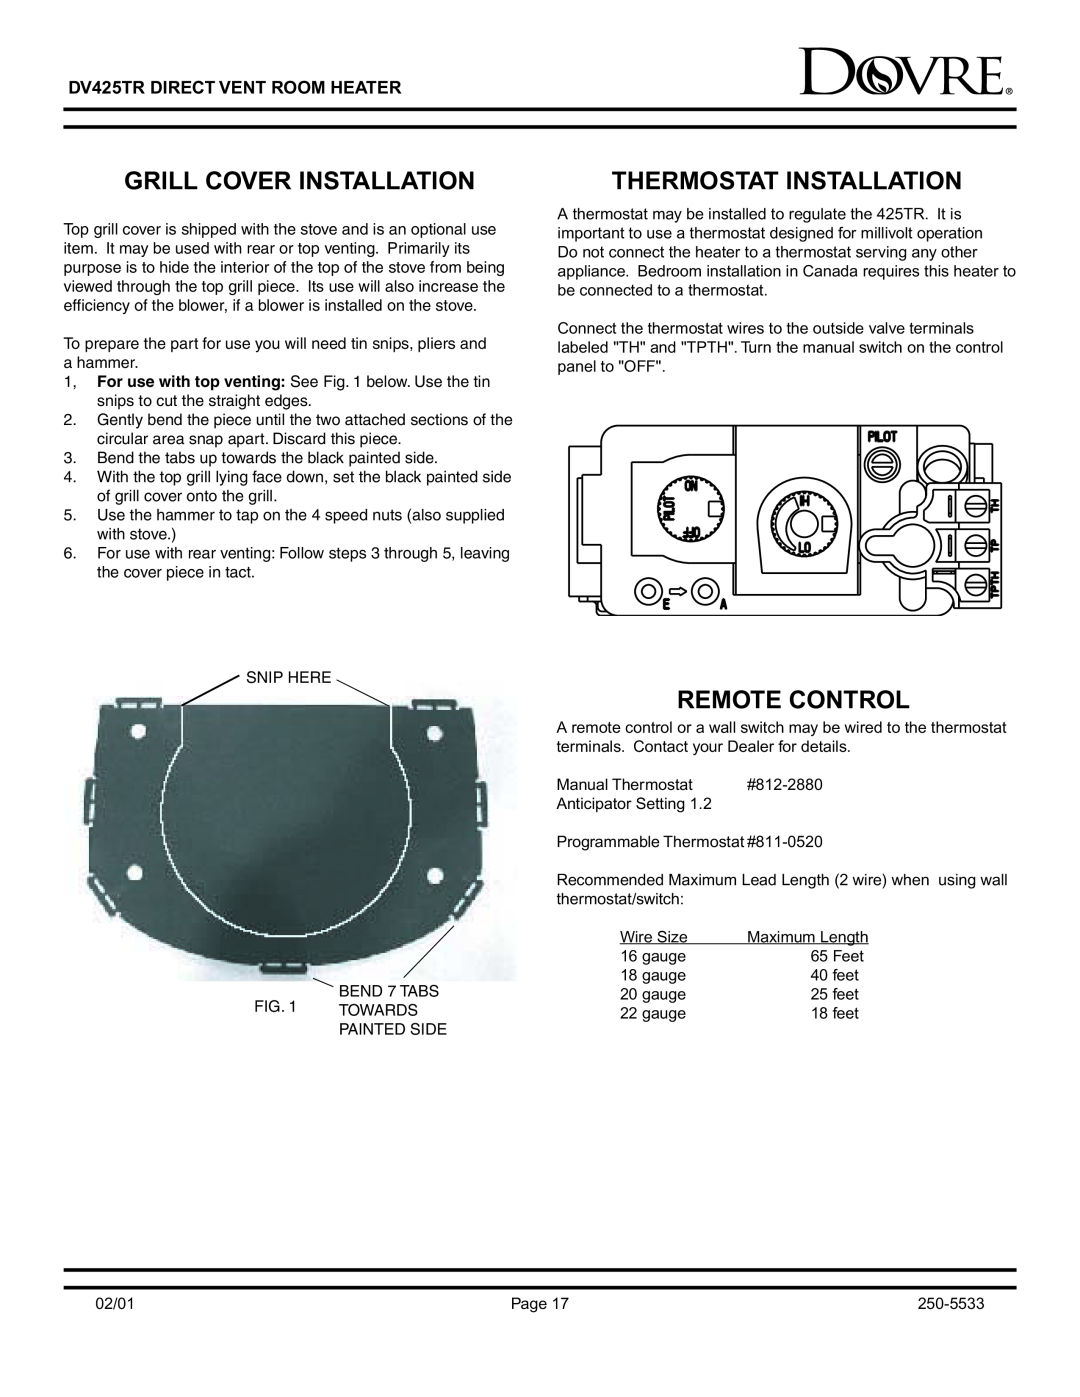 Sapphire Audio DV425TR owner manual Grill Cover Installation, Thermostat Installation, Remote Control 